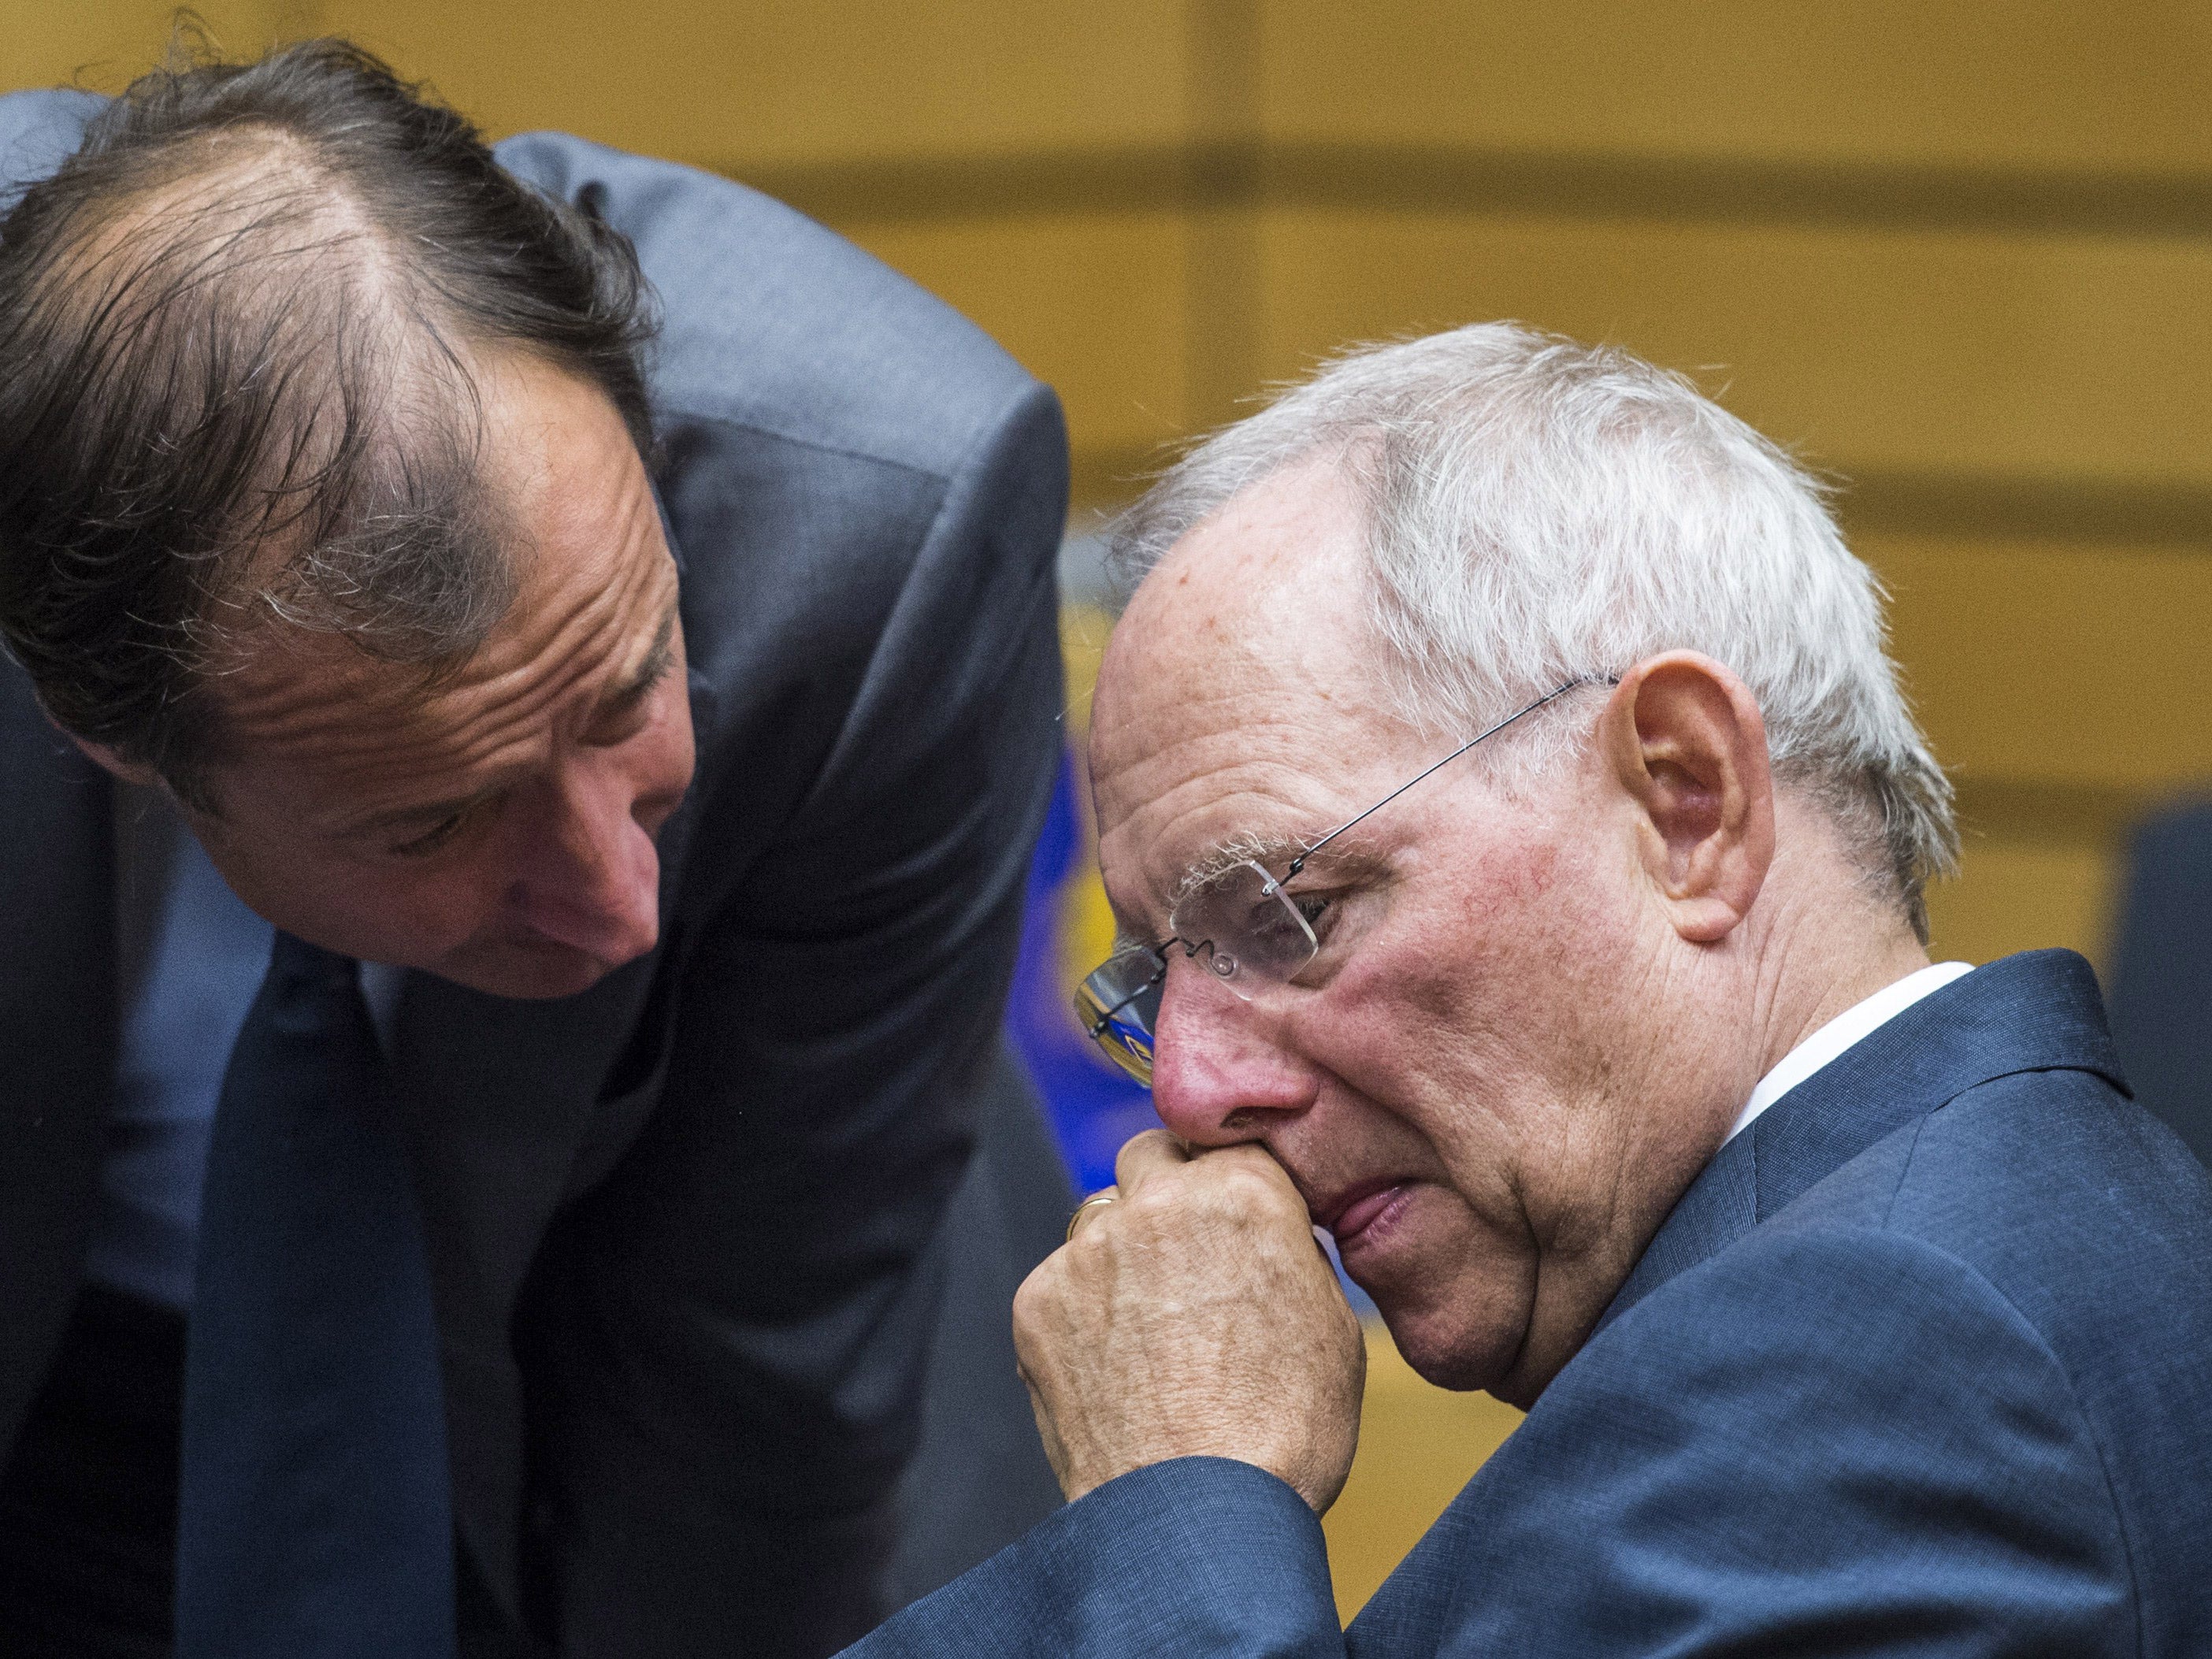 Schaeuble said Greece would need to do more to persuade Germany to agree to a new loan